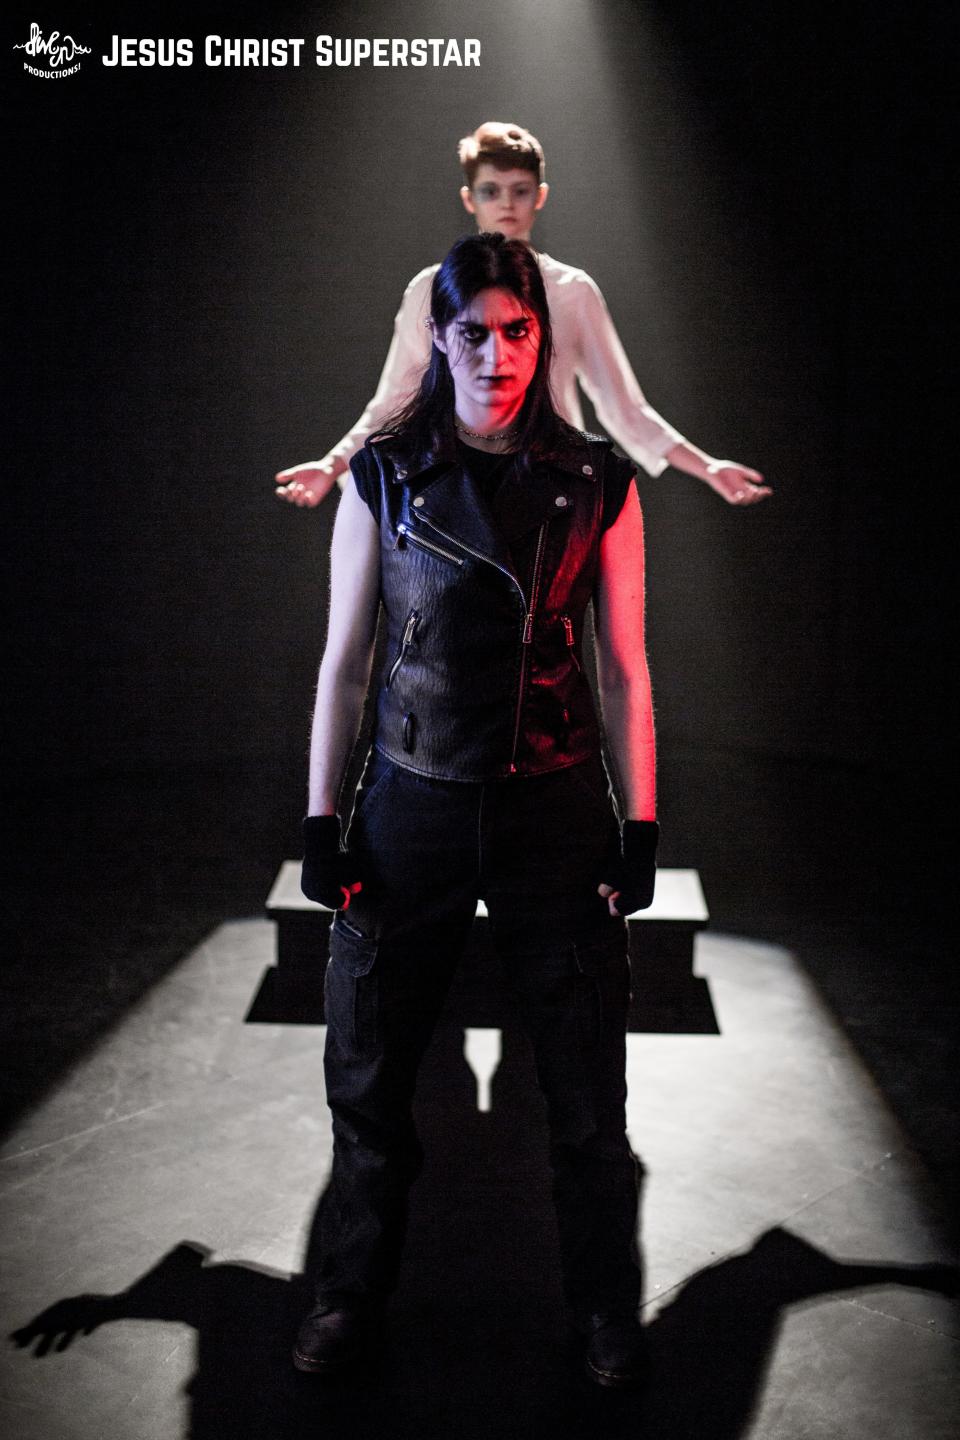 Judas stands in front of Jesus in a scene from Dive In Productions' "Jesus Christ Superstar" now playing at the Players' Ring Theatre in Portsmouth.